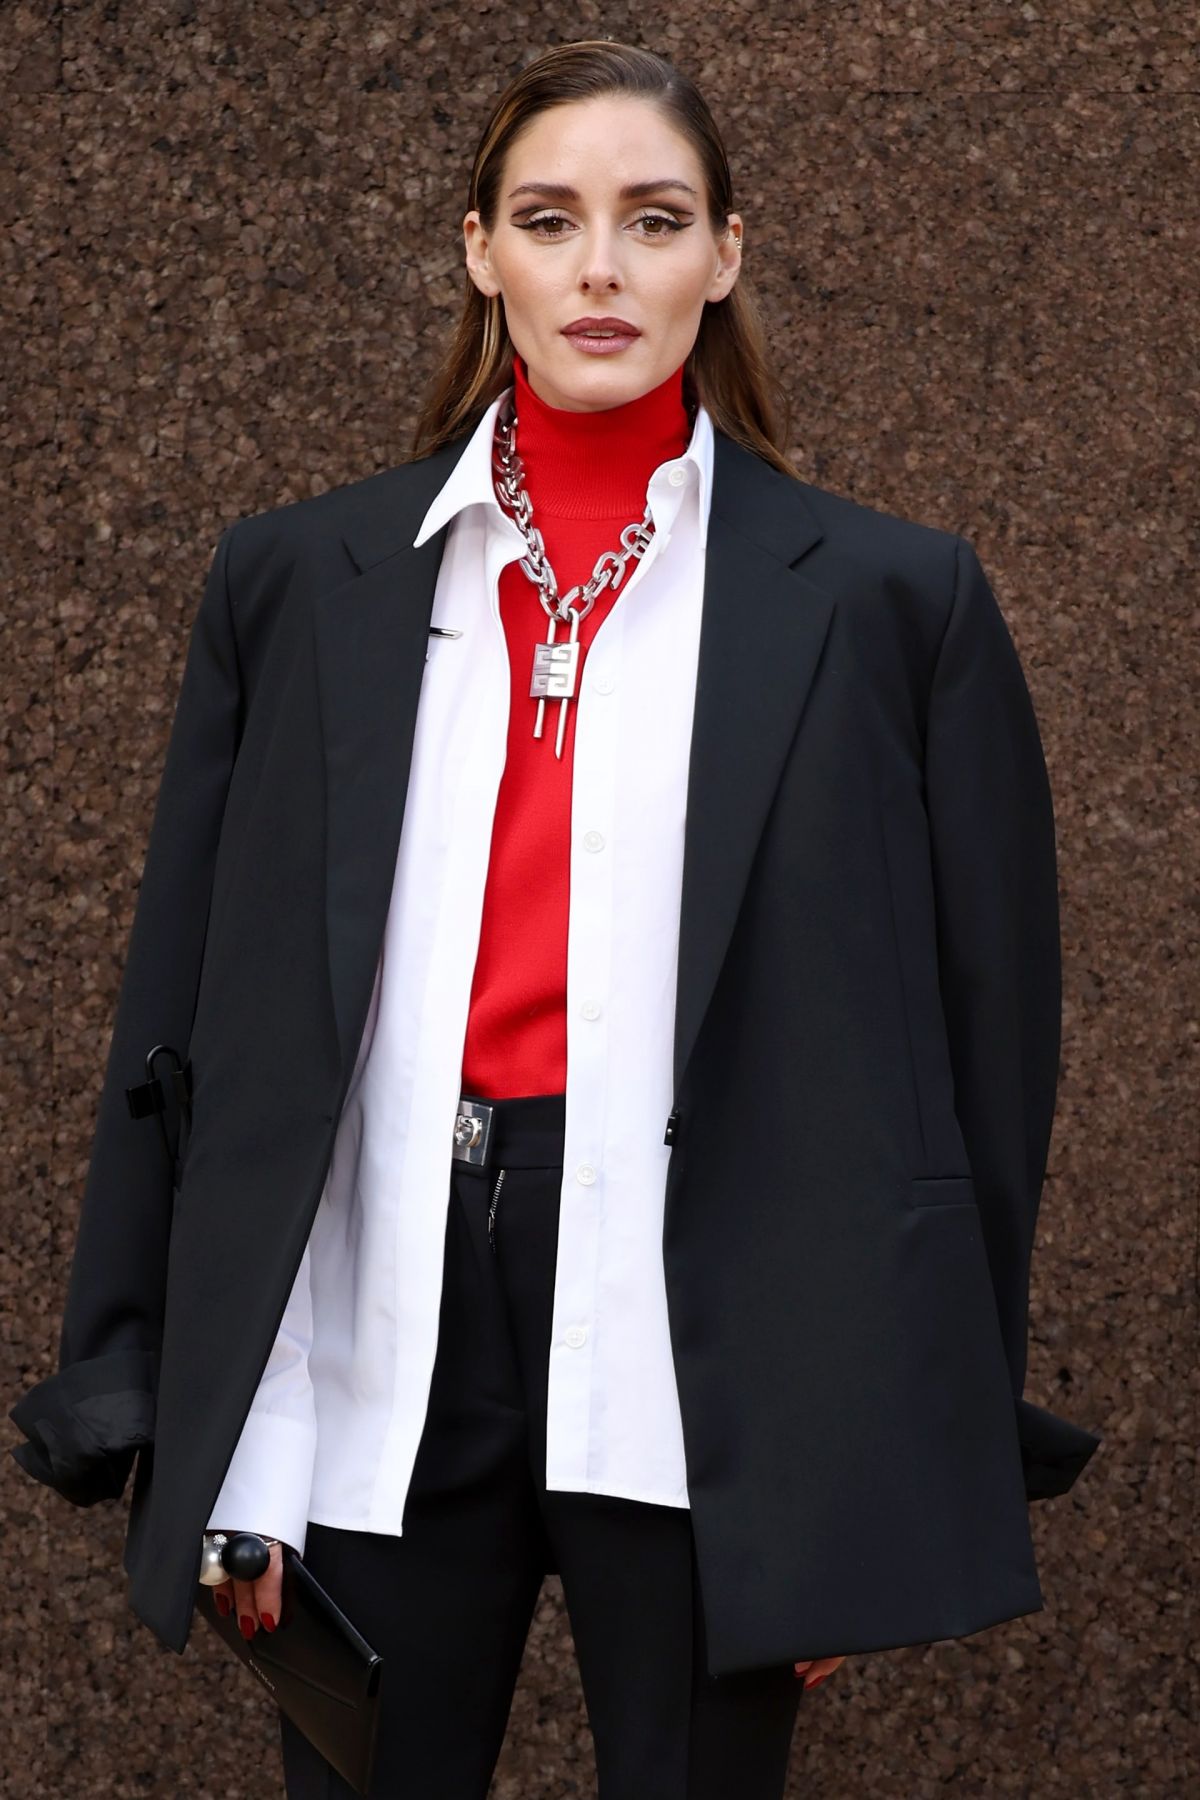 OLIVIA PALERMO at GIvenchy Fashion Show in Paris 10/02/2022 – HawtCelebs